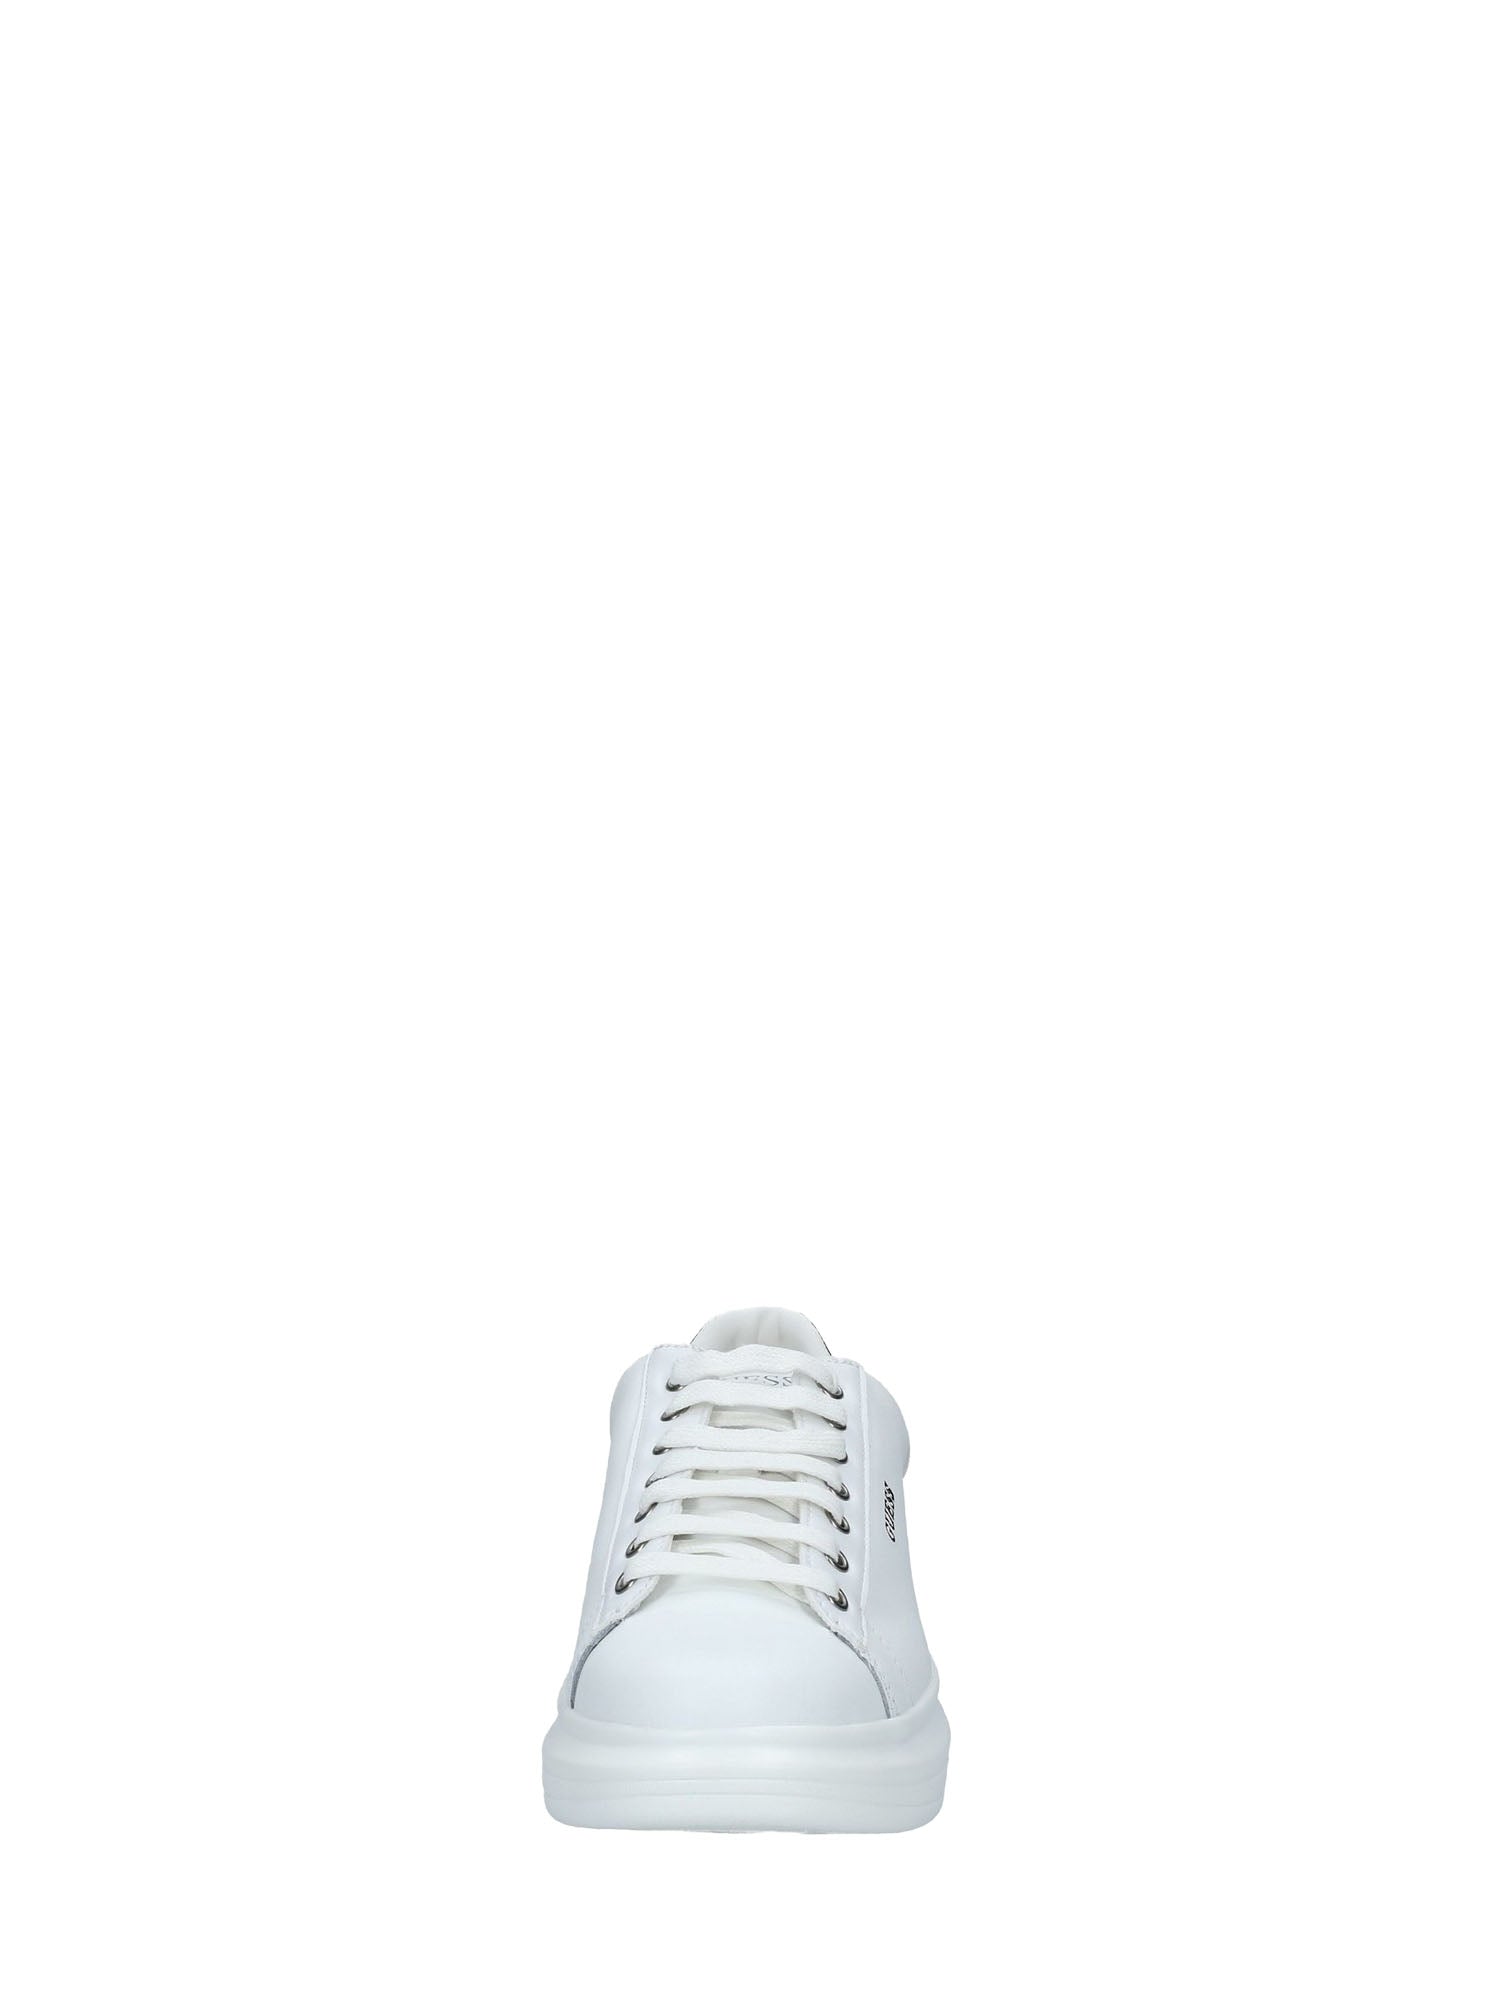 GUESS SNEAKER SALERNO BIANCO - CAMOUFLAGE